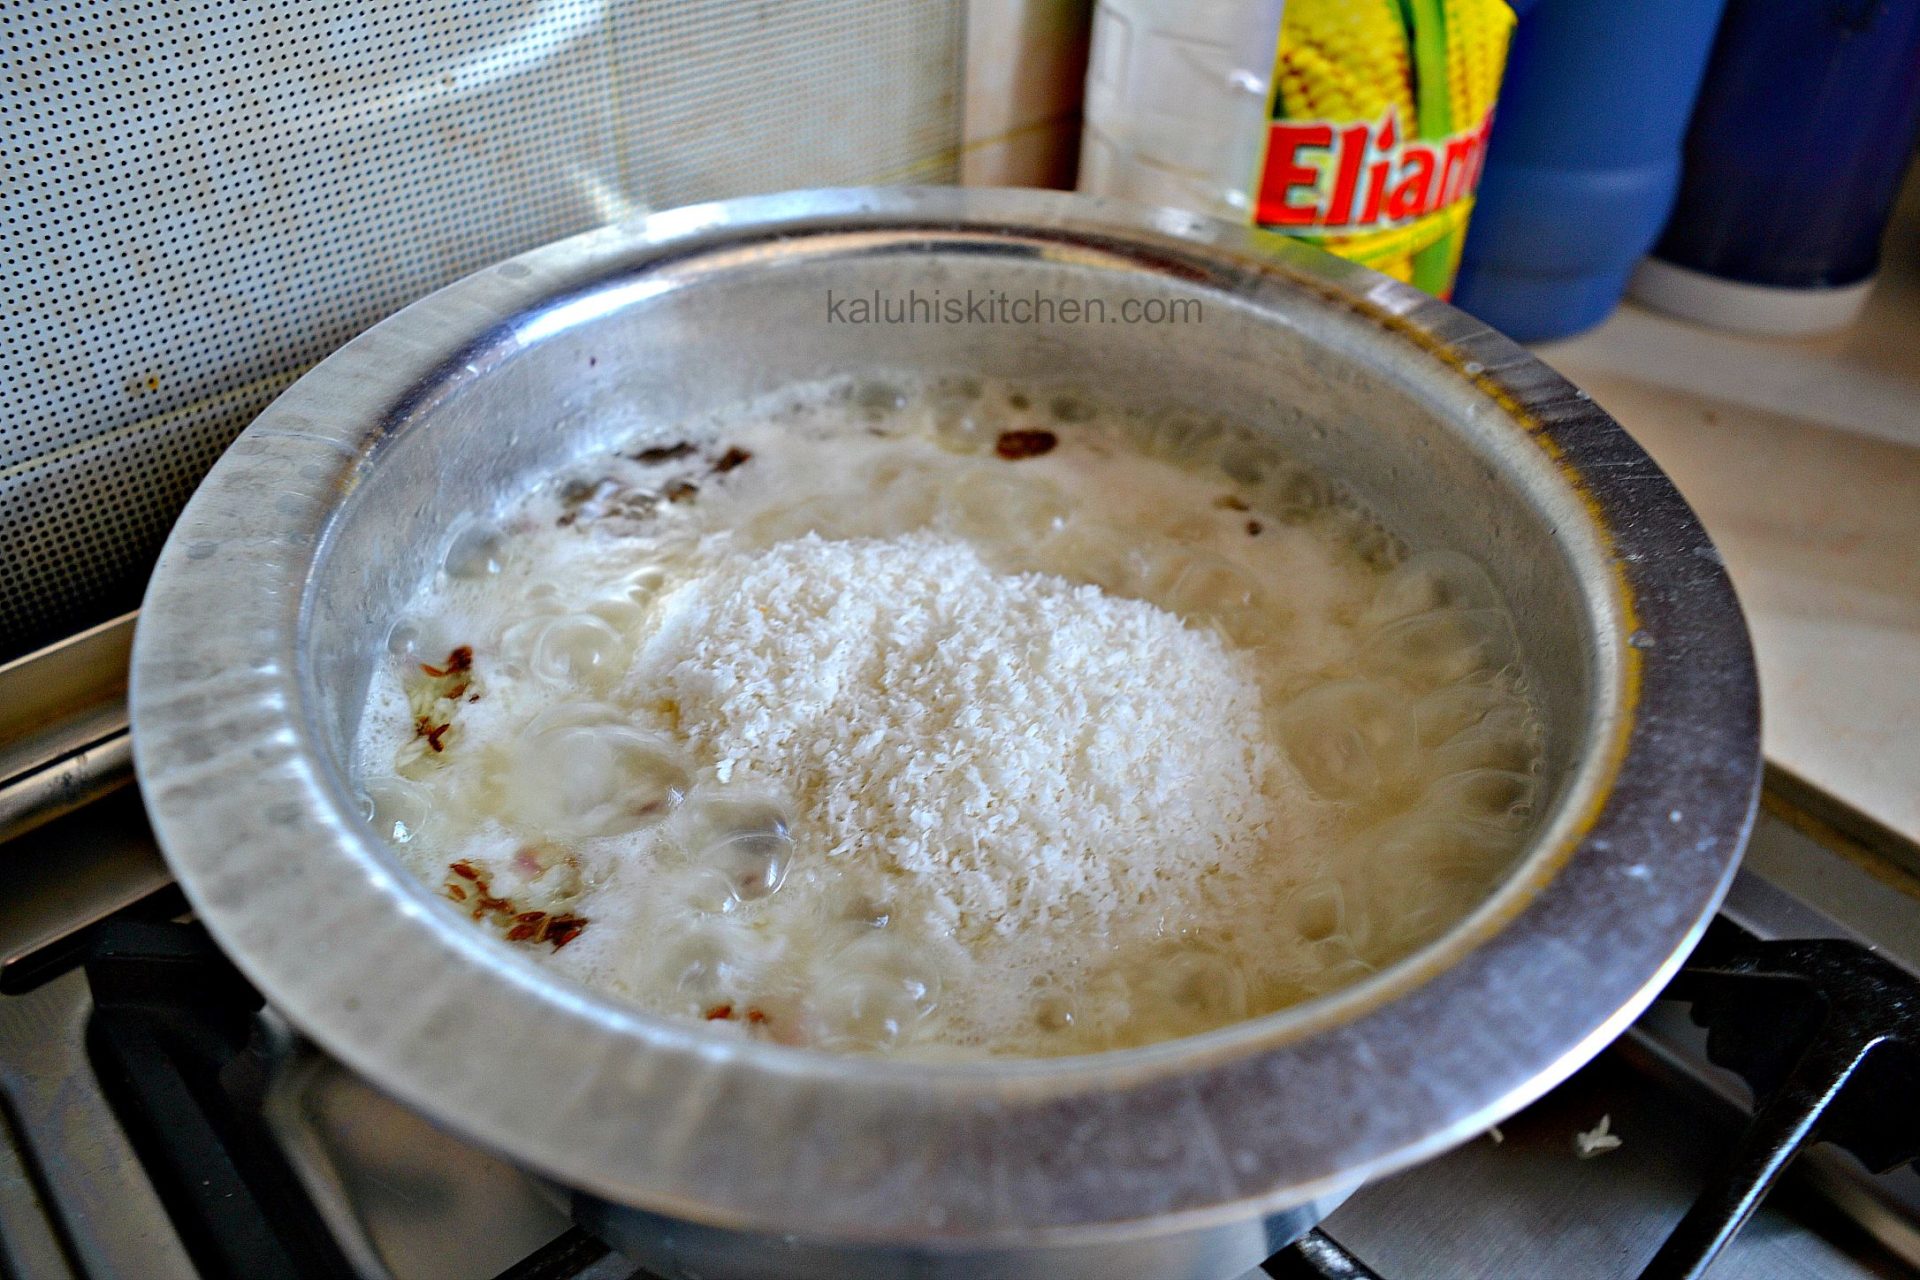 add the coconut to the rice when the water level has decreased by 14_mix it in and cover co finish cooking_wali wa nazi_kaluhiskitchen.com